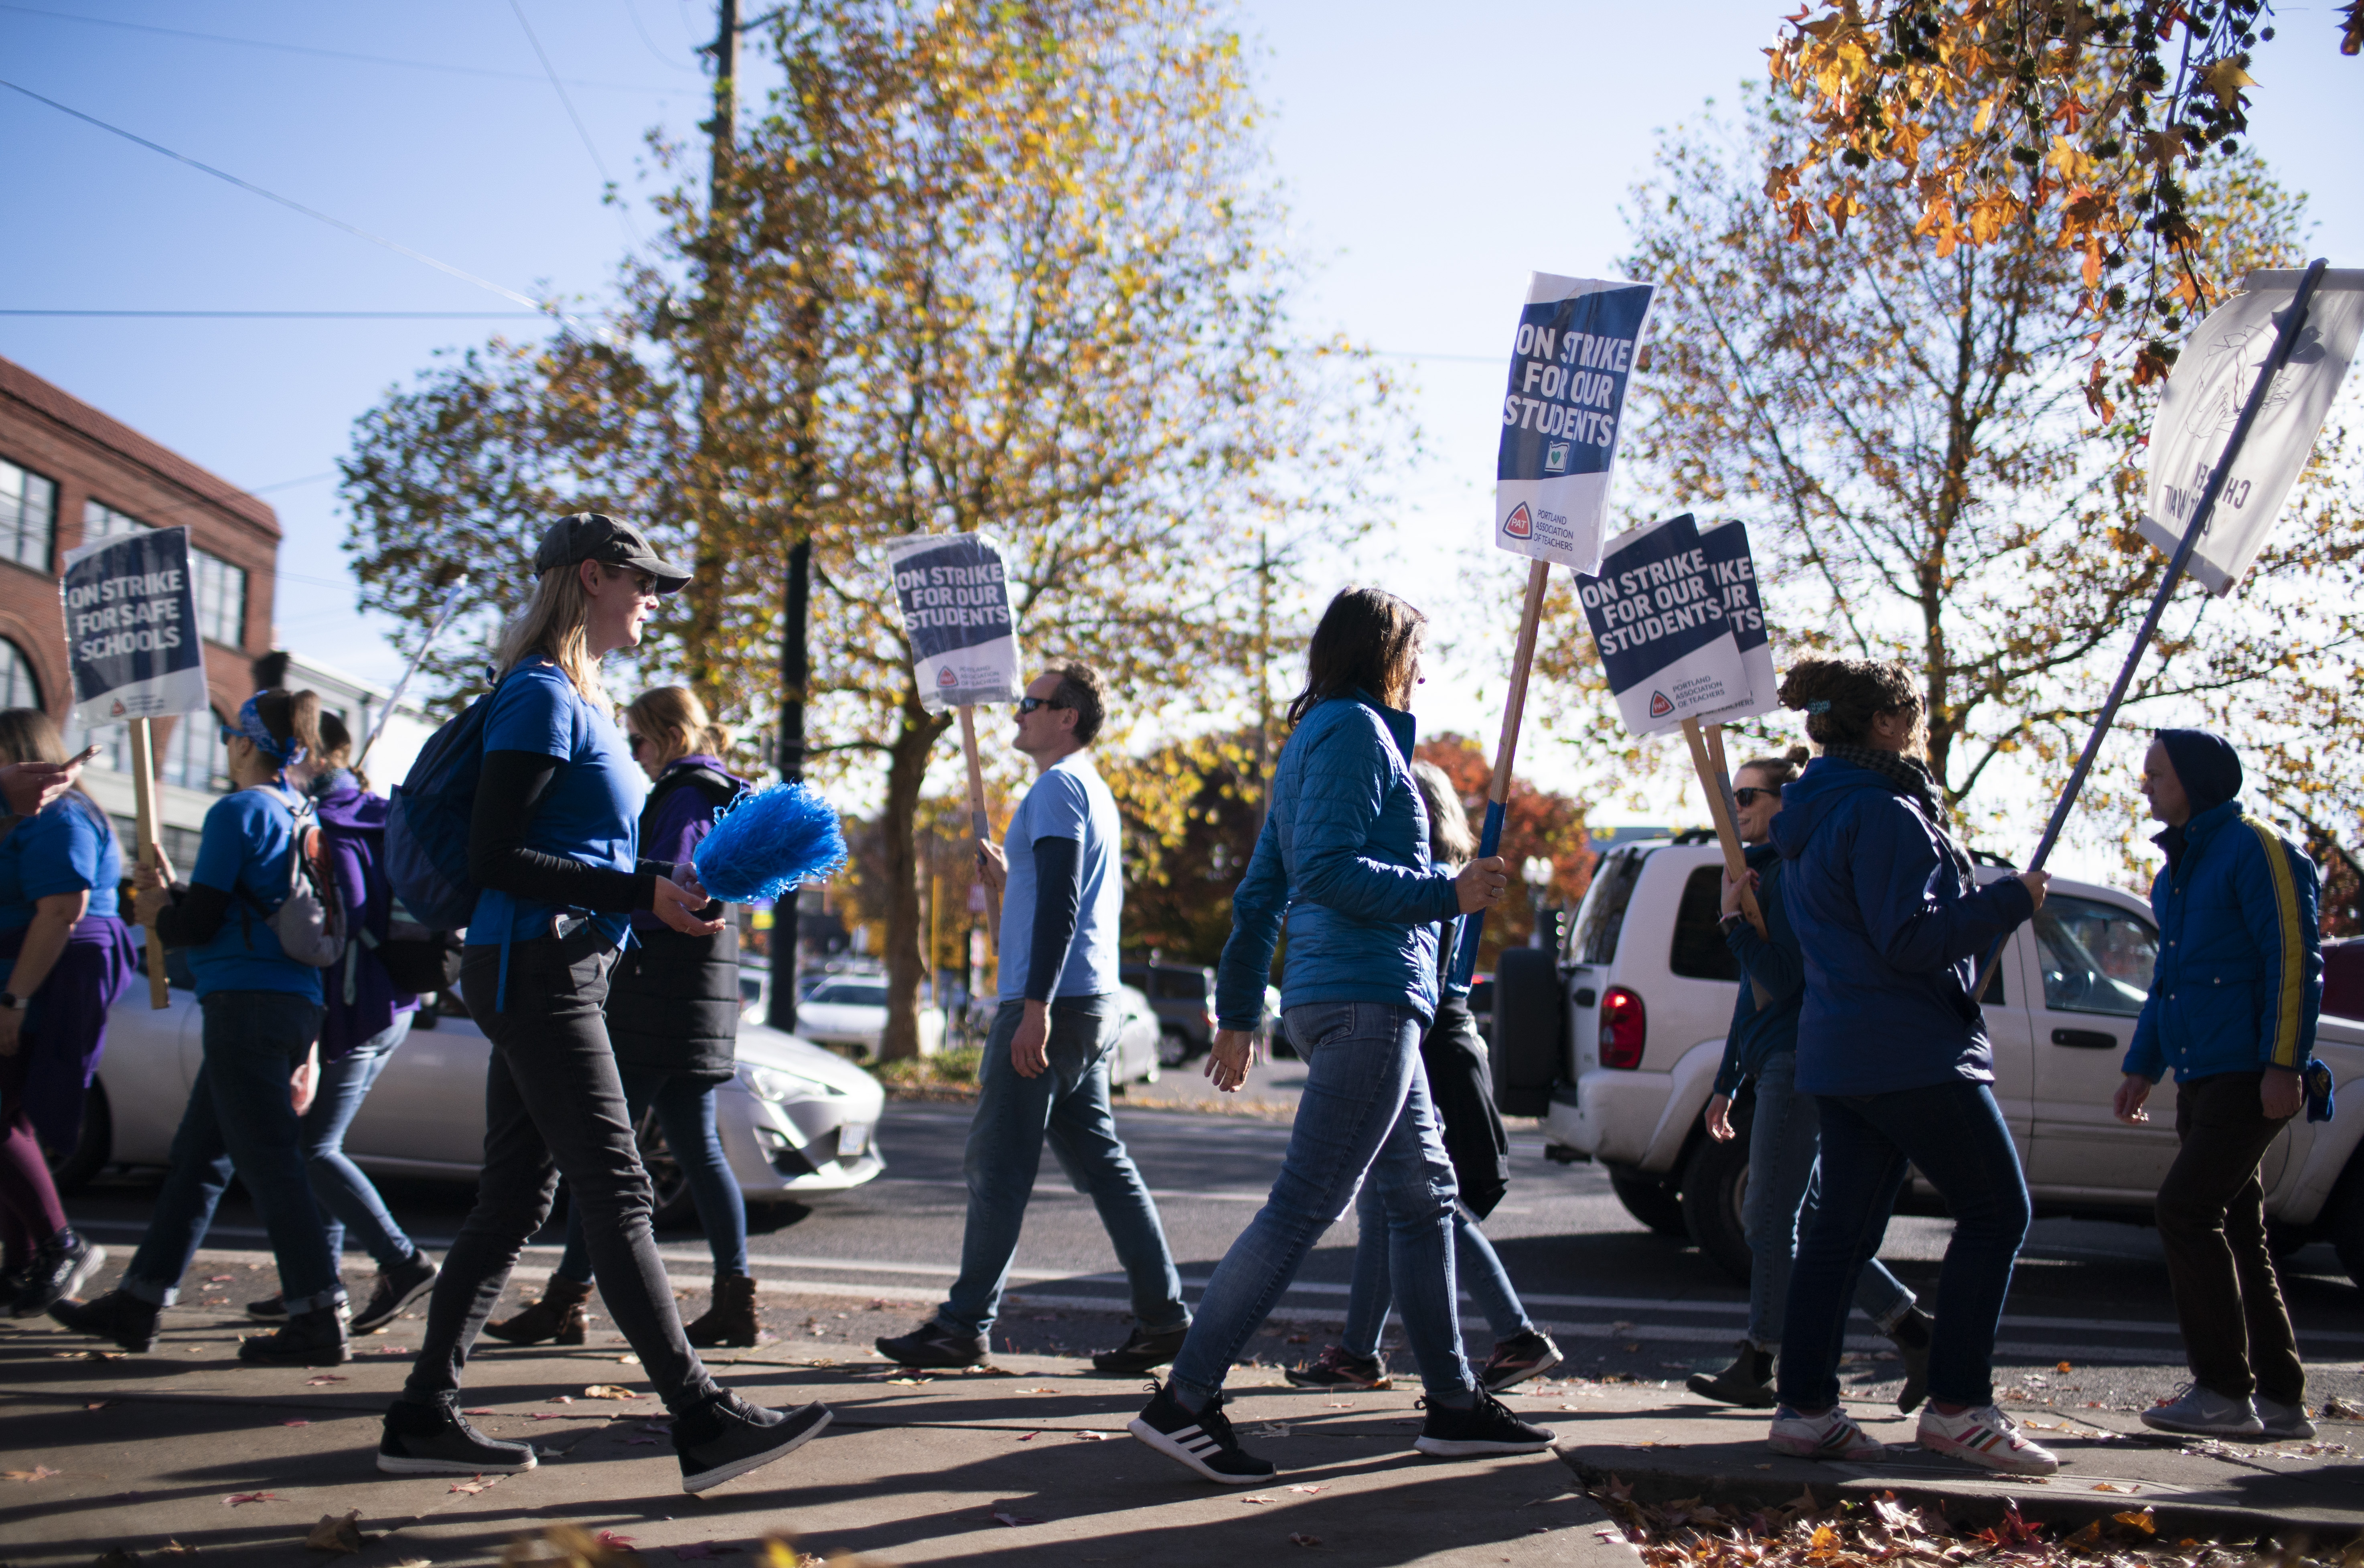 PPS strike closes Portland colleges for ninth day Wednesday, Nov. 15